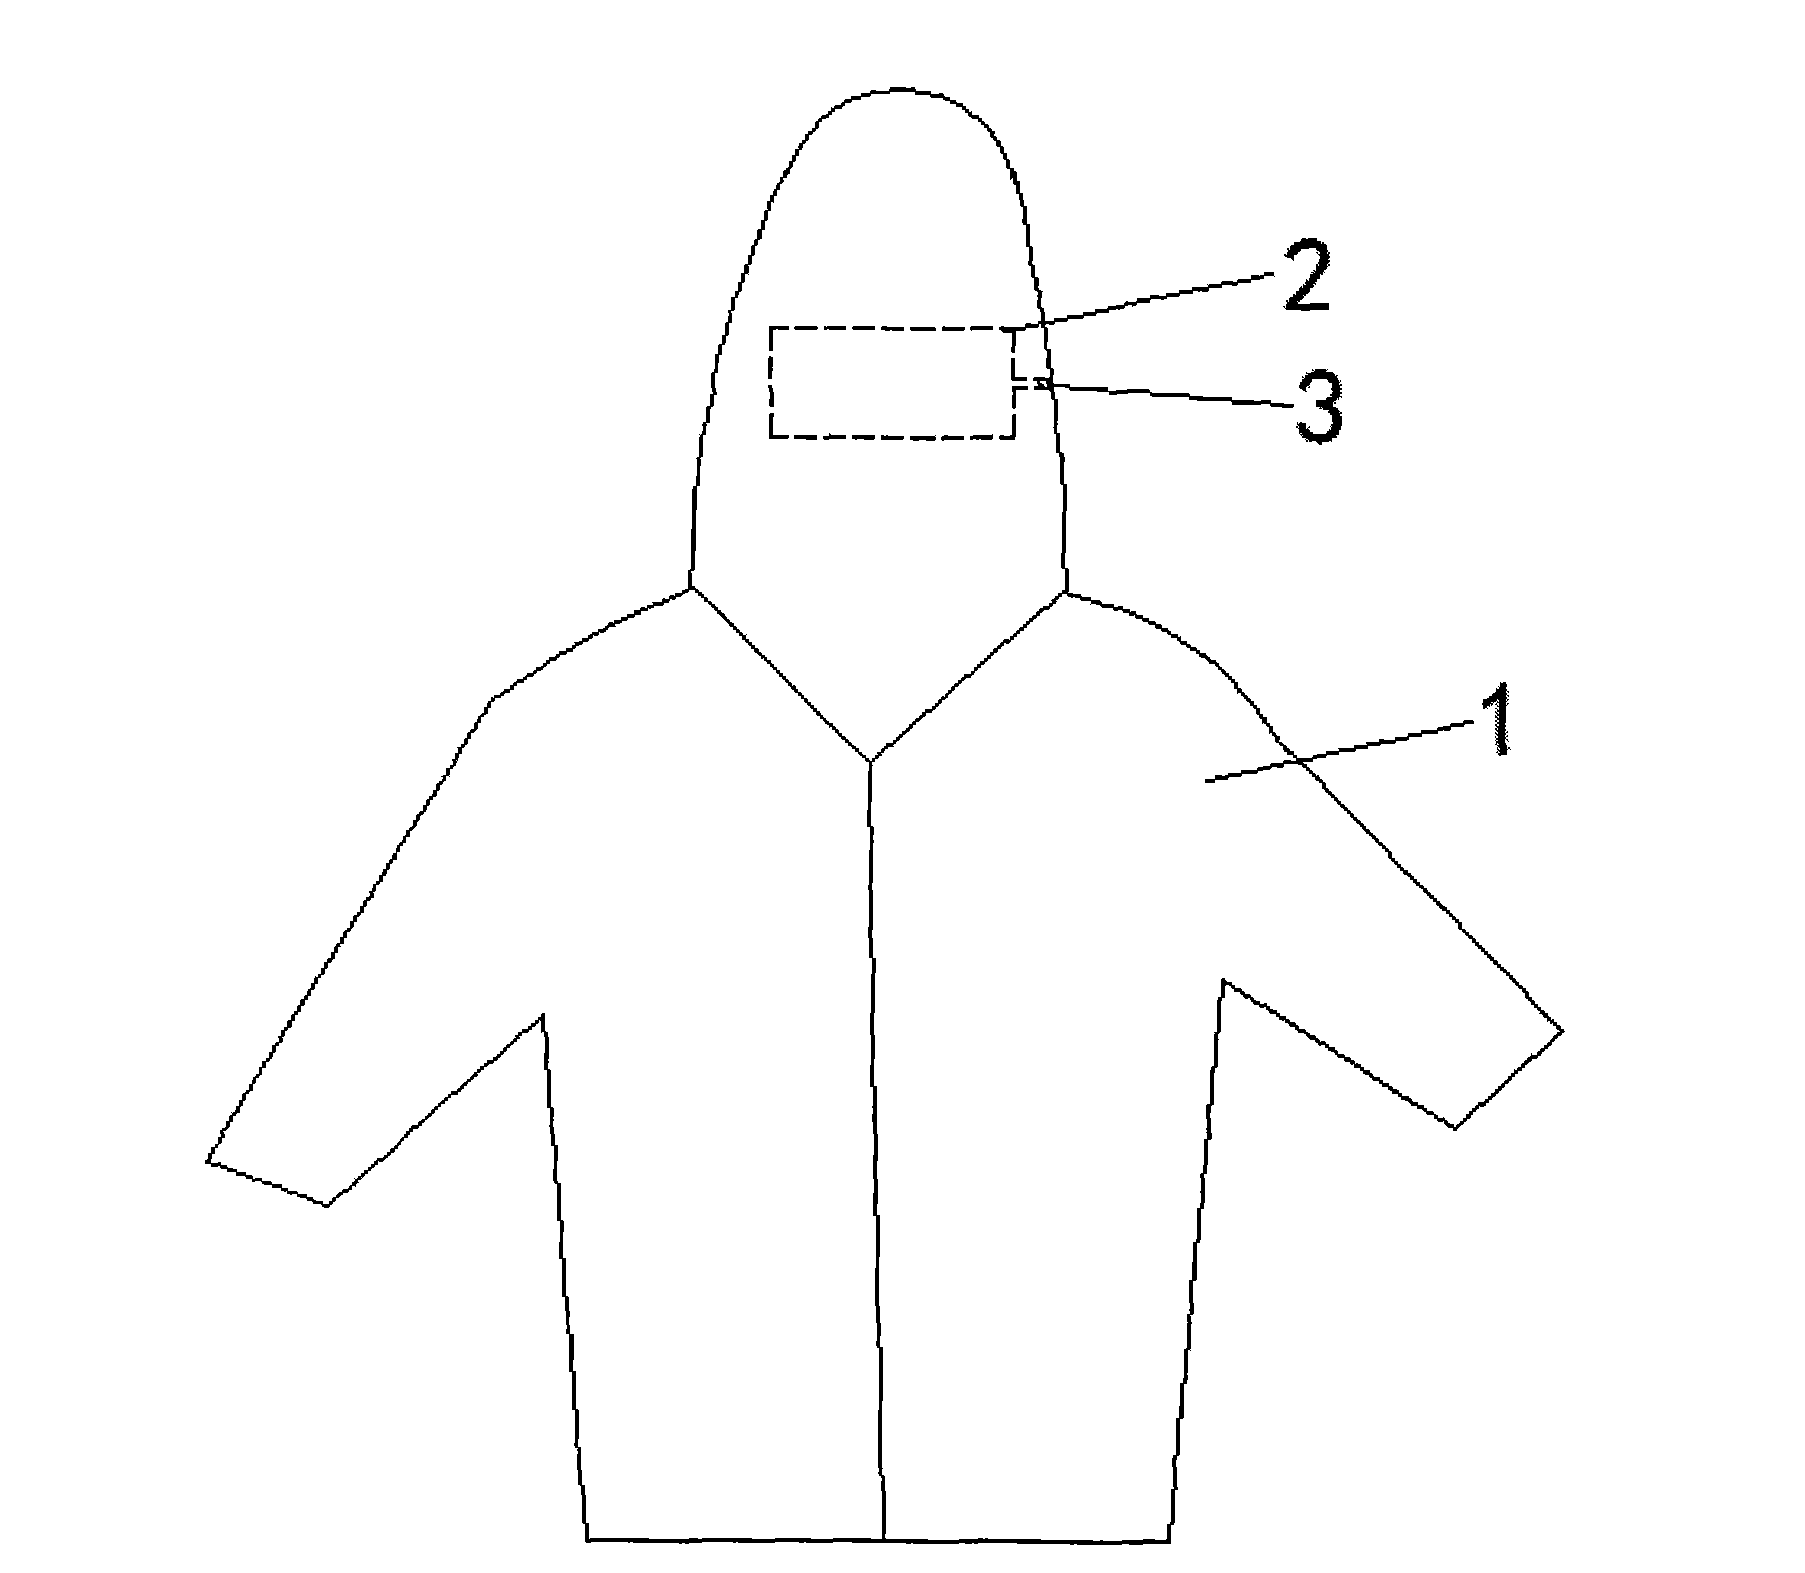 Water absorbing and guiding garment with cap provided with inflatable bag